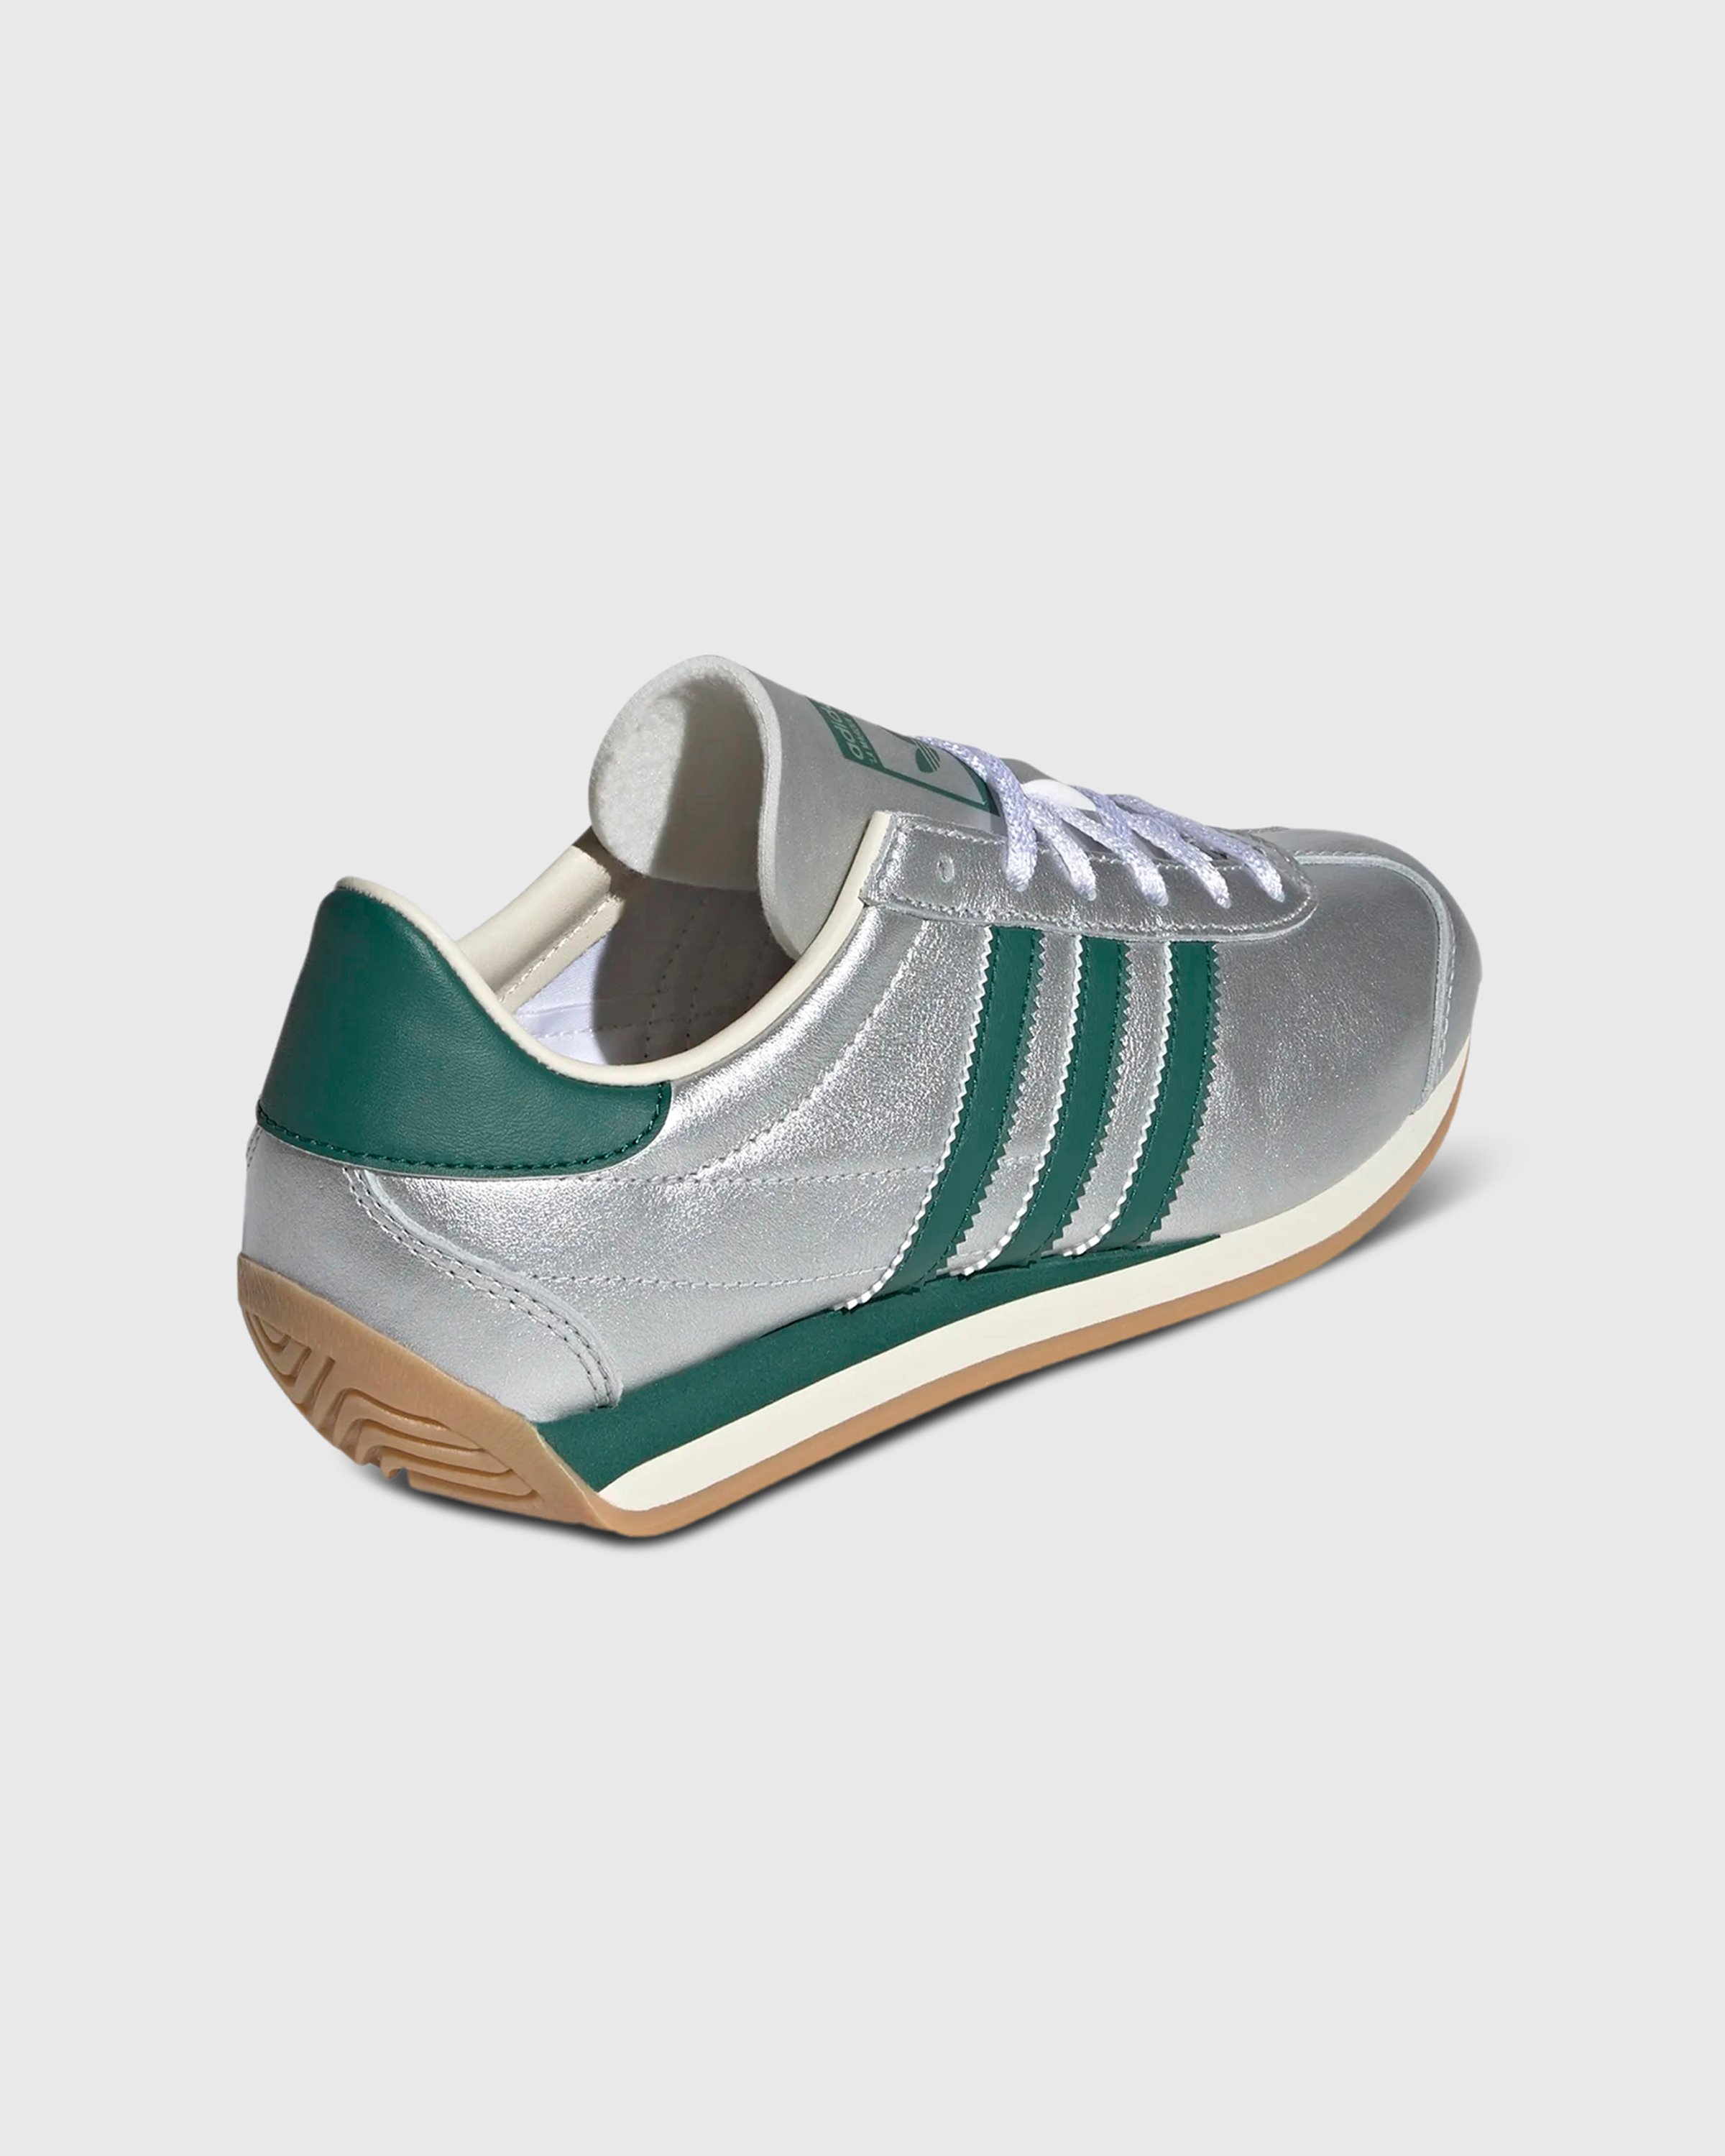 Adidas - COUNTRY OG W        SILVMT/CGREEN/CWHITE - Footwear - Silver - Image 4